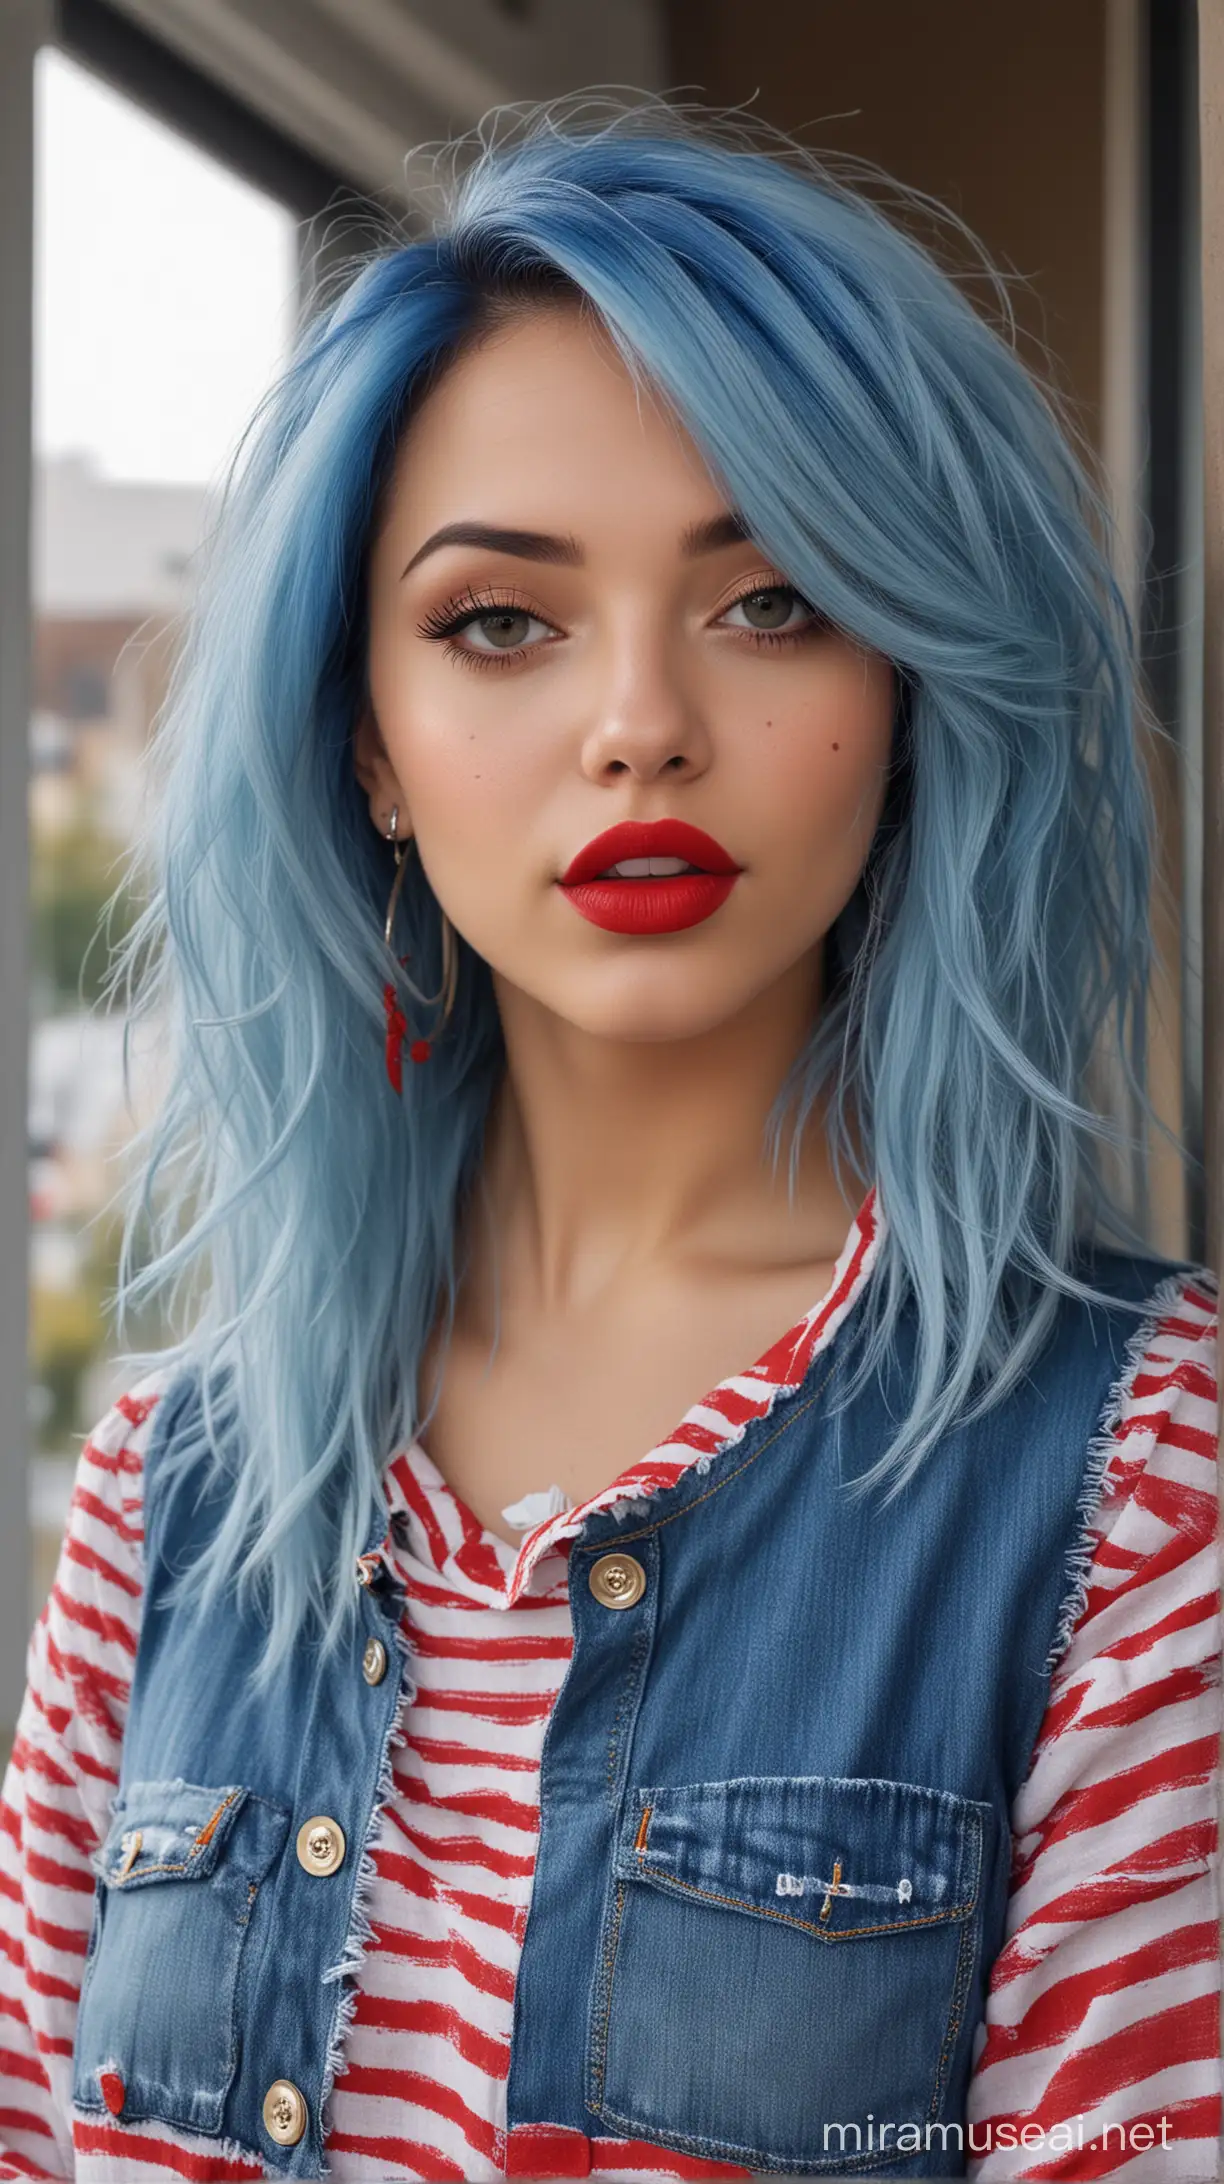 4k Ai art beautiful USA girl blue hair red lipstick nose ring ear tops fit jeans and red colour shirt in usa home window